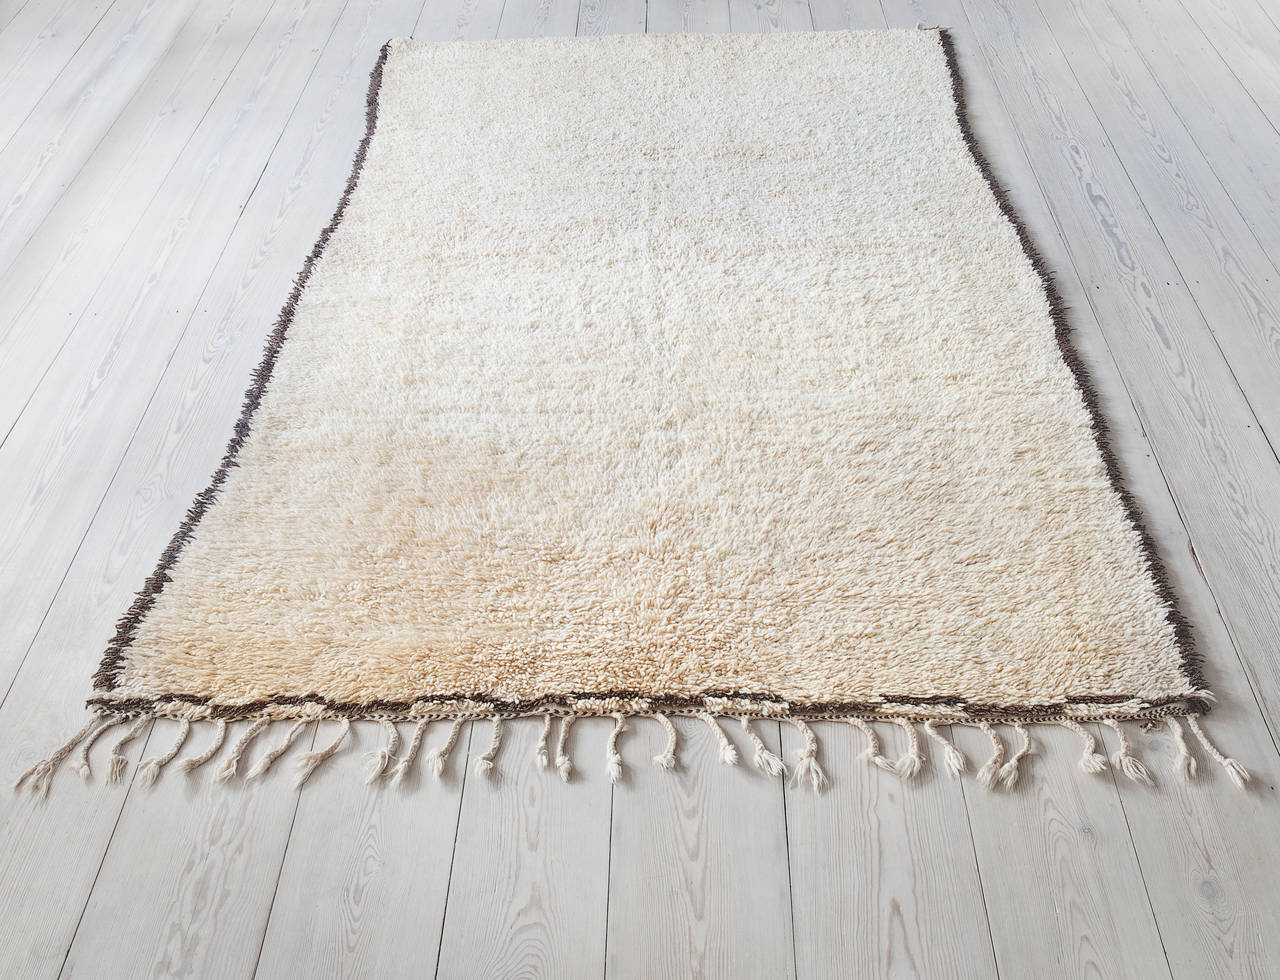 Exquisite Beni Ourain pile rug. Brown edges on ivory background, ivory tassels.